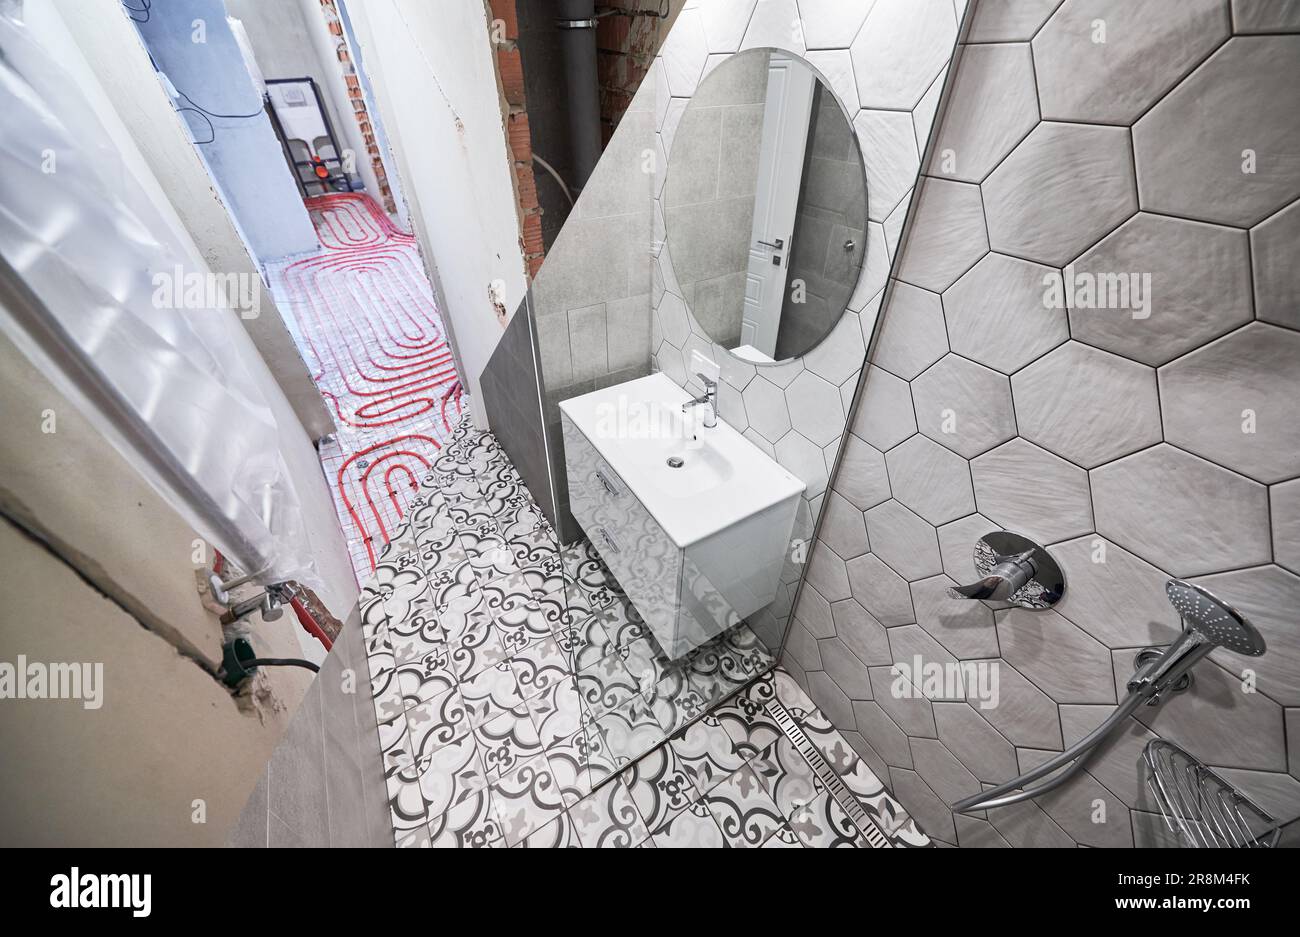 Photo collage of apartment bathroom before and after restoration. Comparison of old room with underfloor heating pipes and new renovated restroom with sink, shower, mirror and towel dryer. Stock Photo